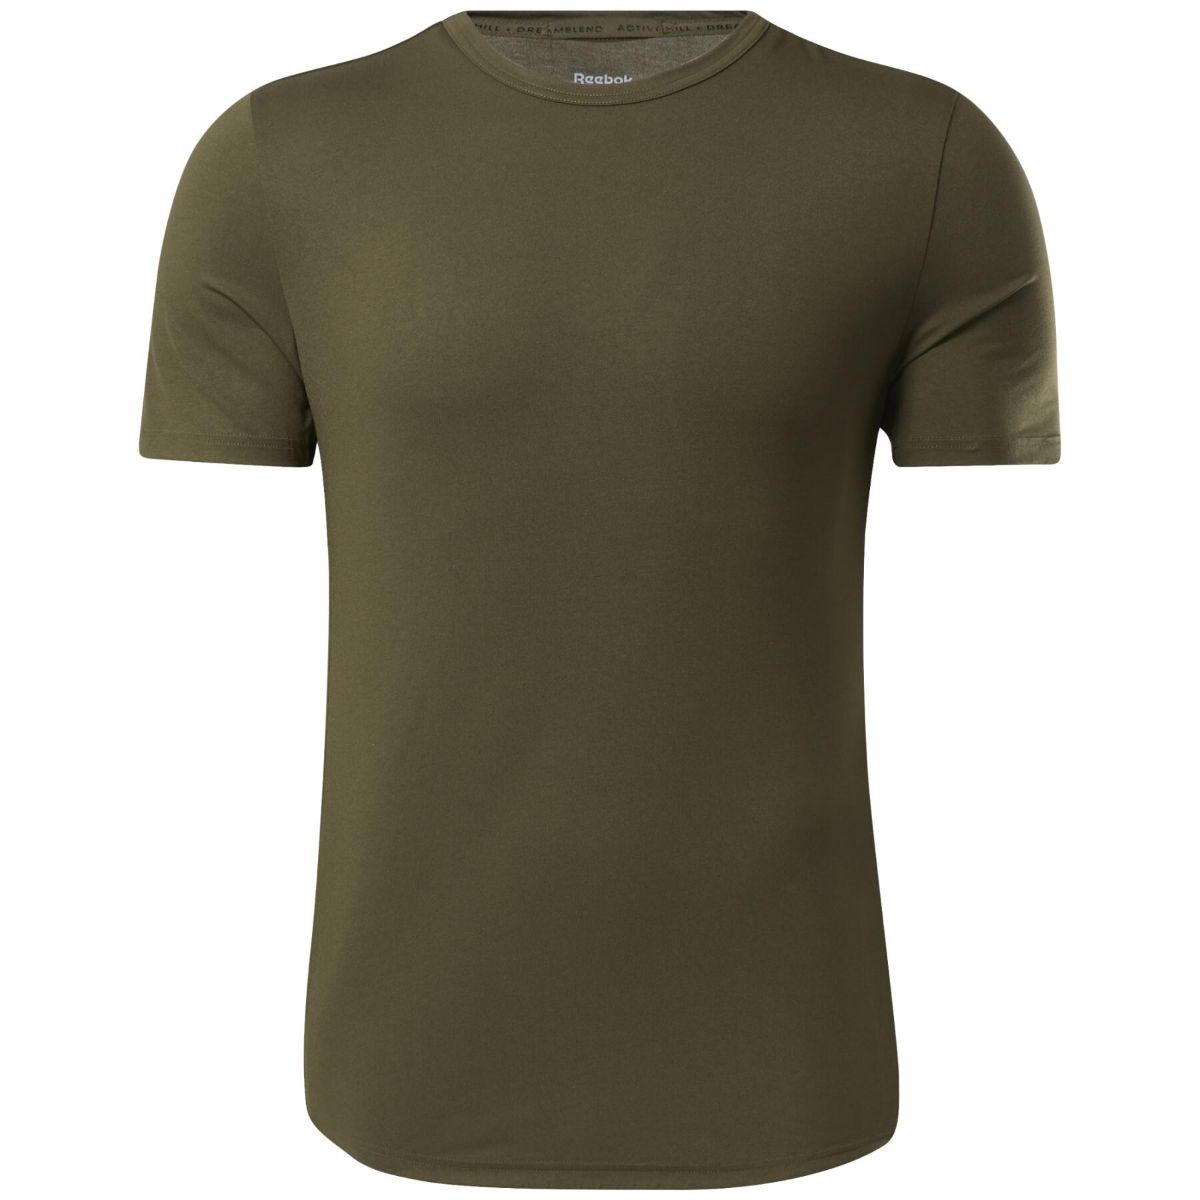 Best for either training or casual lifestyle wear	